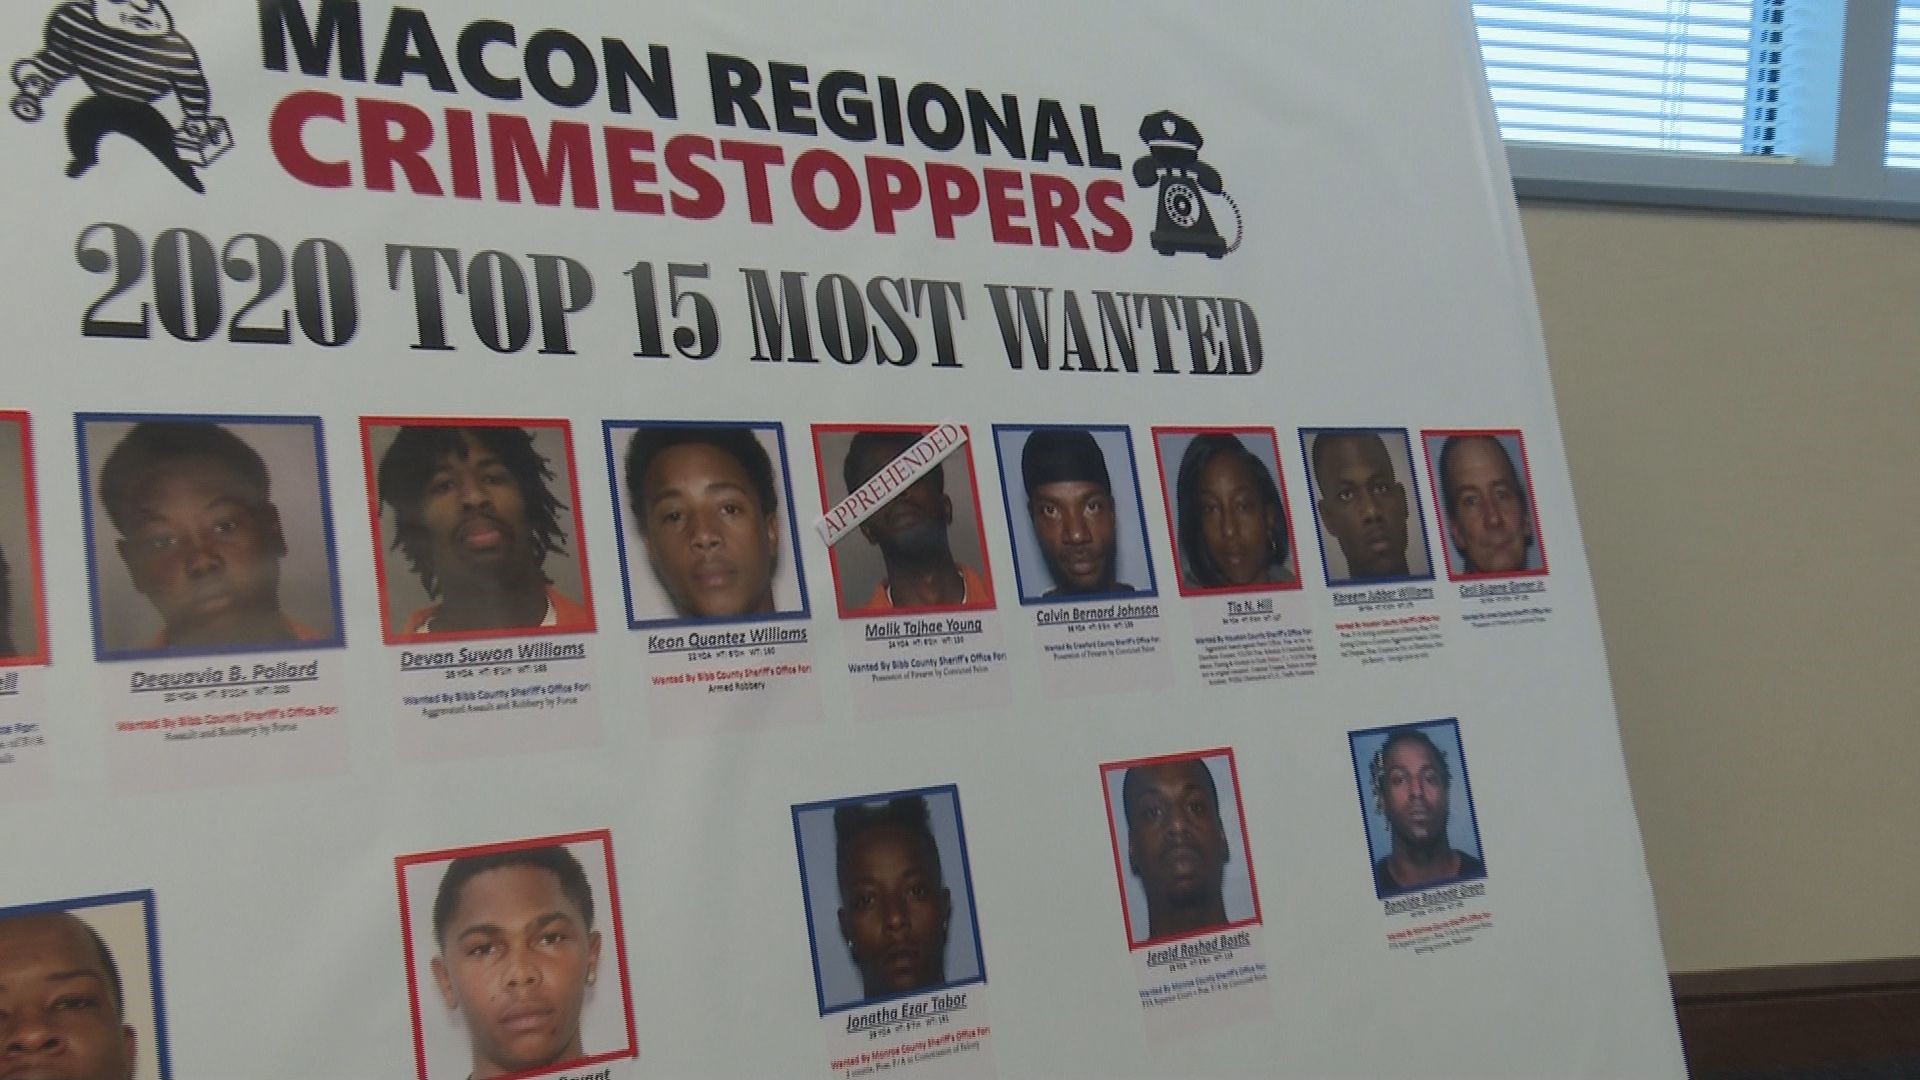 On Tuesday, law enforcement from across central Georgia and the Macon Regional Crimestoppers announced their top 15 Most Wanted list.